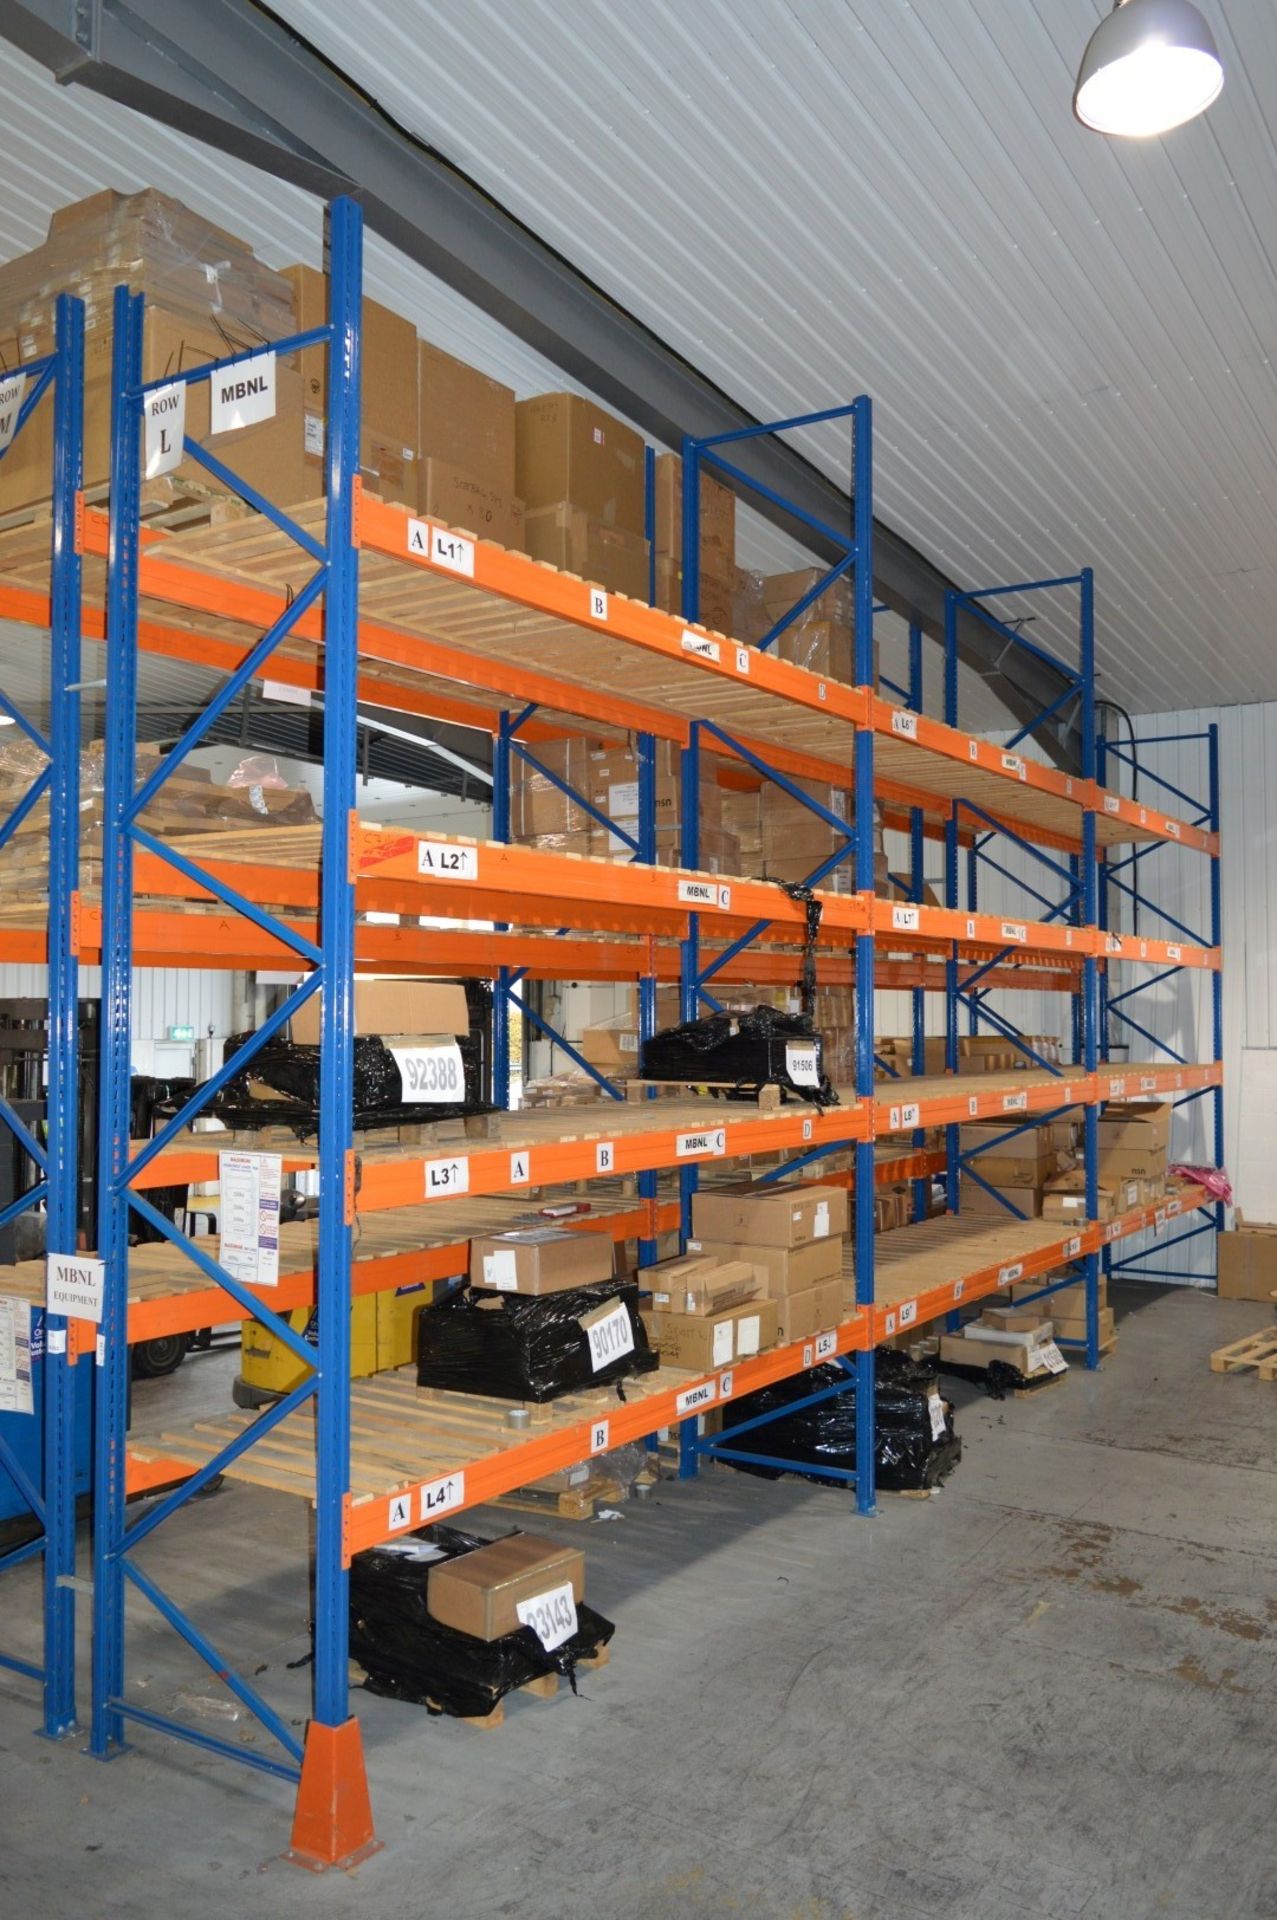 3 x Bays of Warehouse PALLET RACKING - Lot Includes 4 x Uprights, 24 x Crossbeams, 1 x Corner